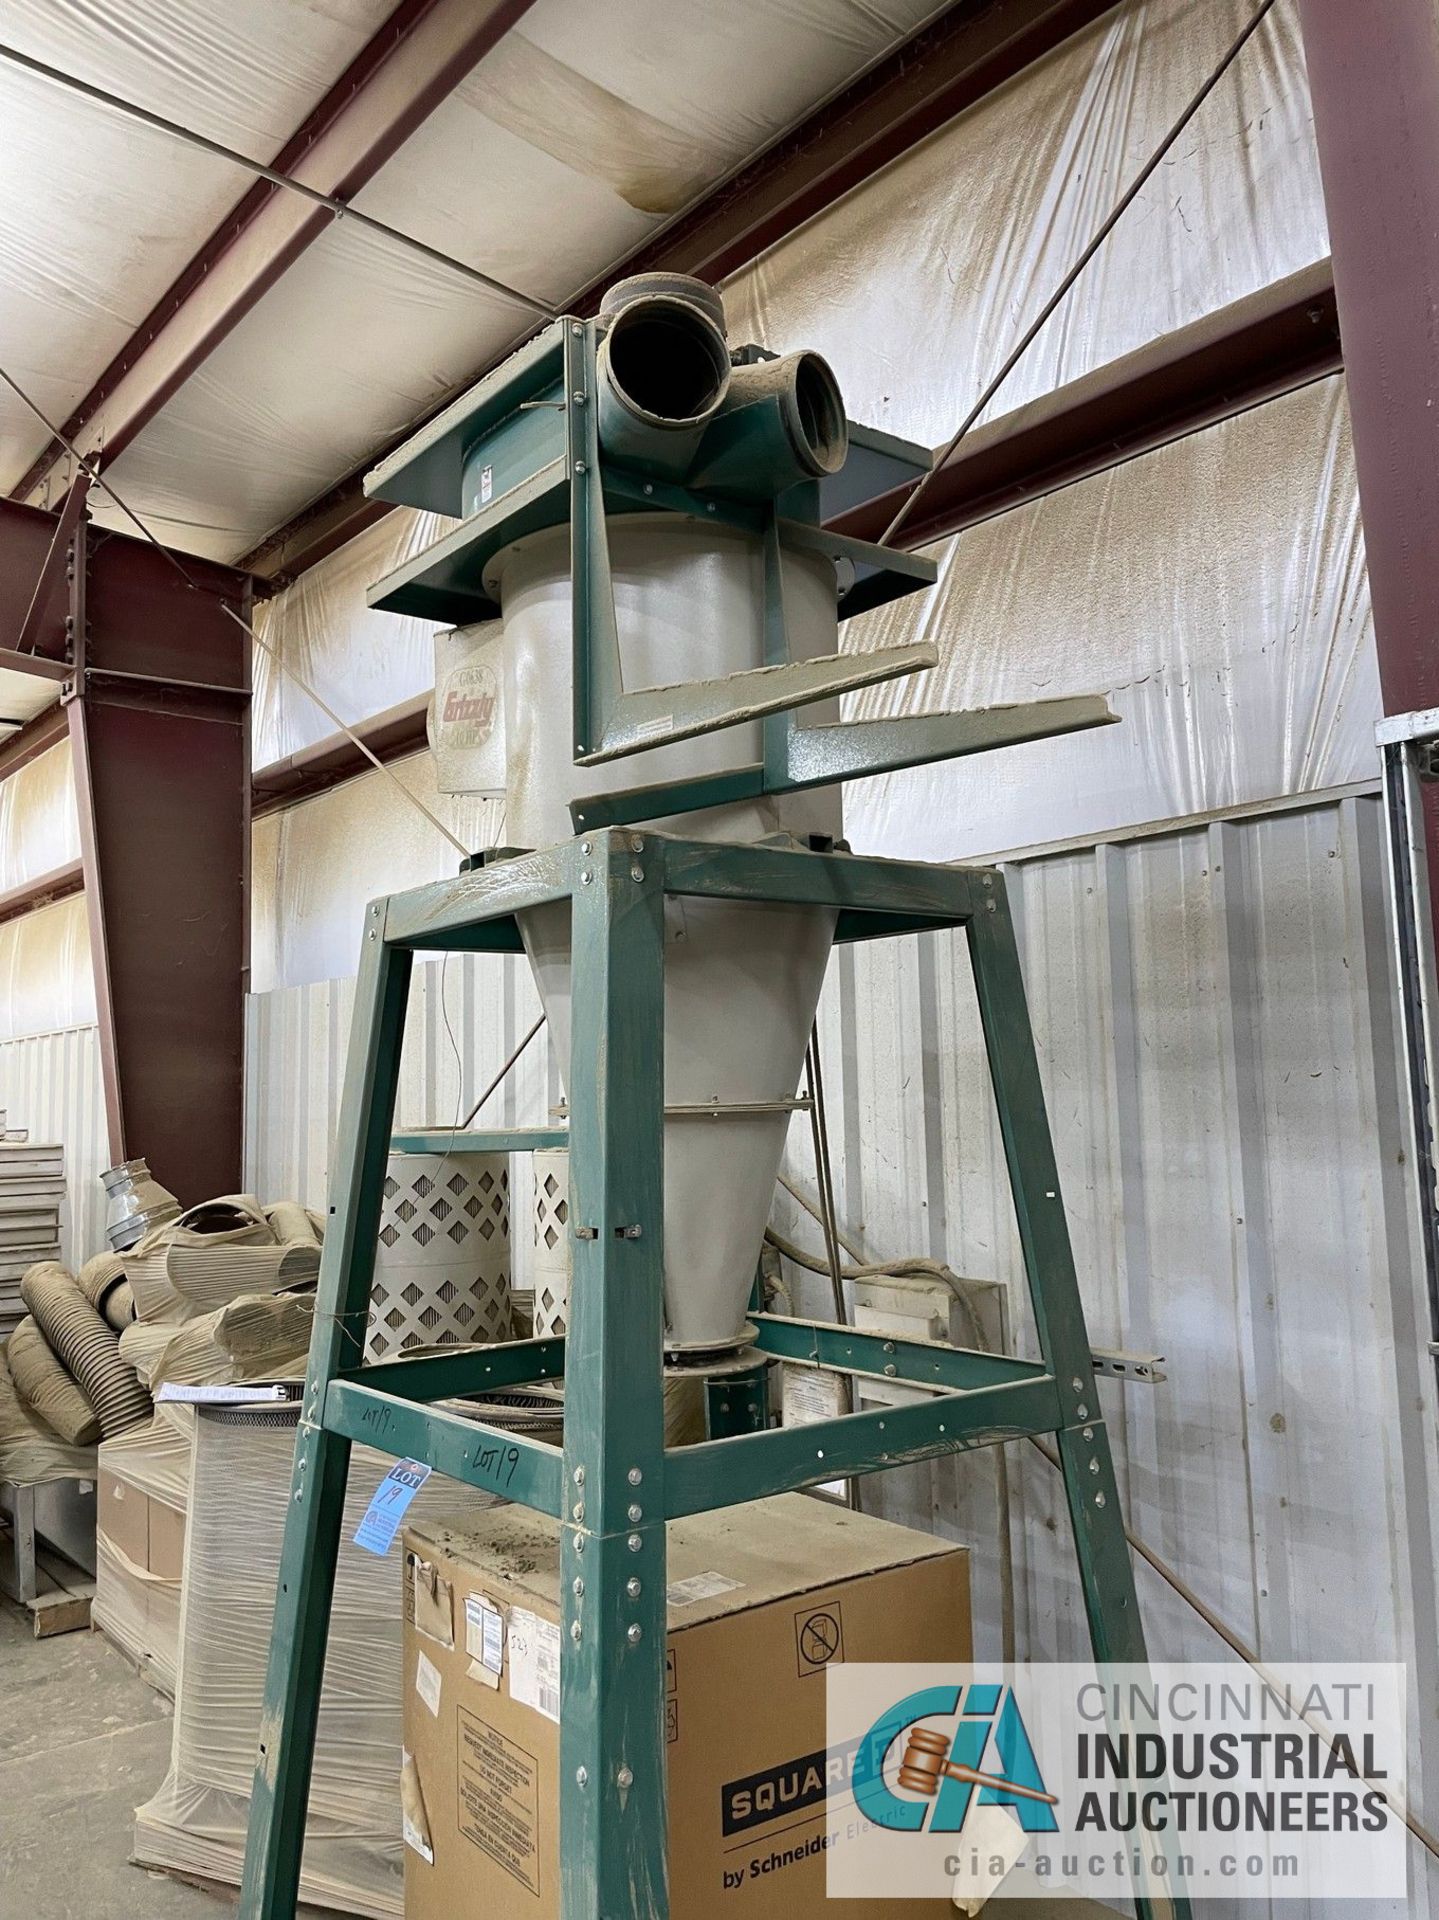 10-HP GRIZZLY MODEL G-0638 CYCLONE DUST COLLECTOR WITH SKID OF FILTERS, APPROX. 12' OVERALL HEIGHT - Image 3 of 5